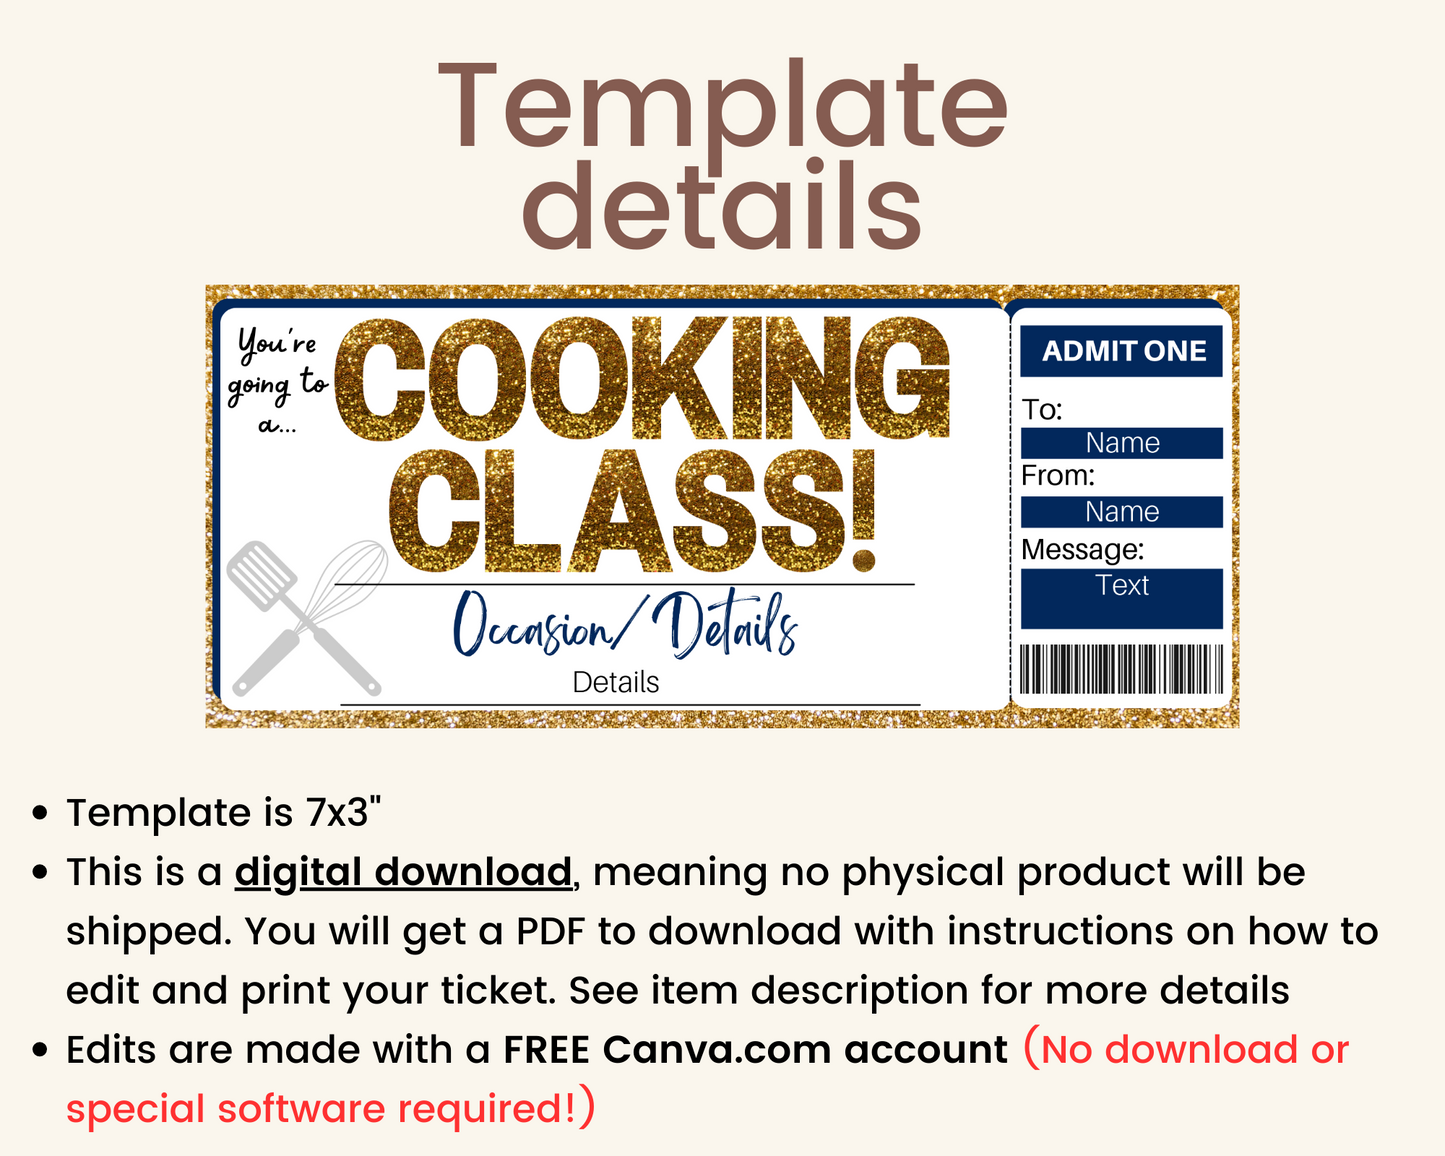 Cooking Class Gift Ticket Template